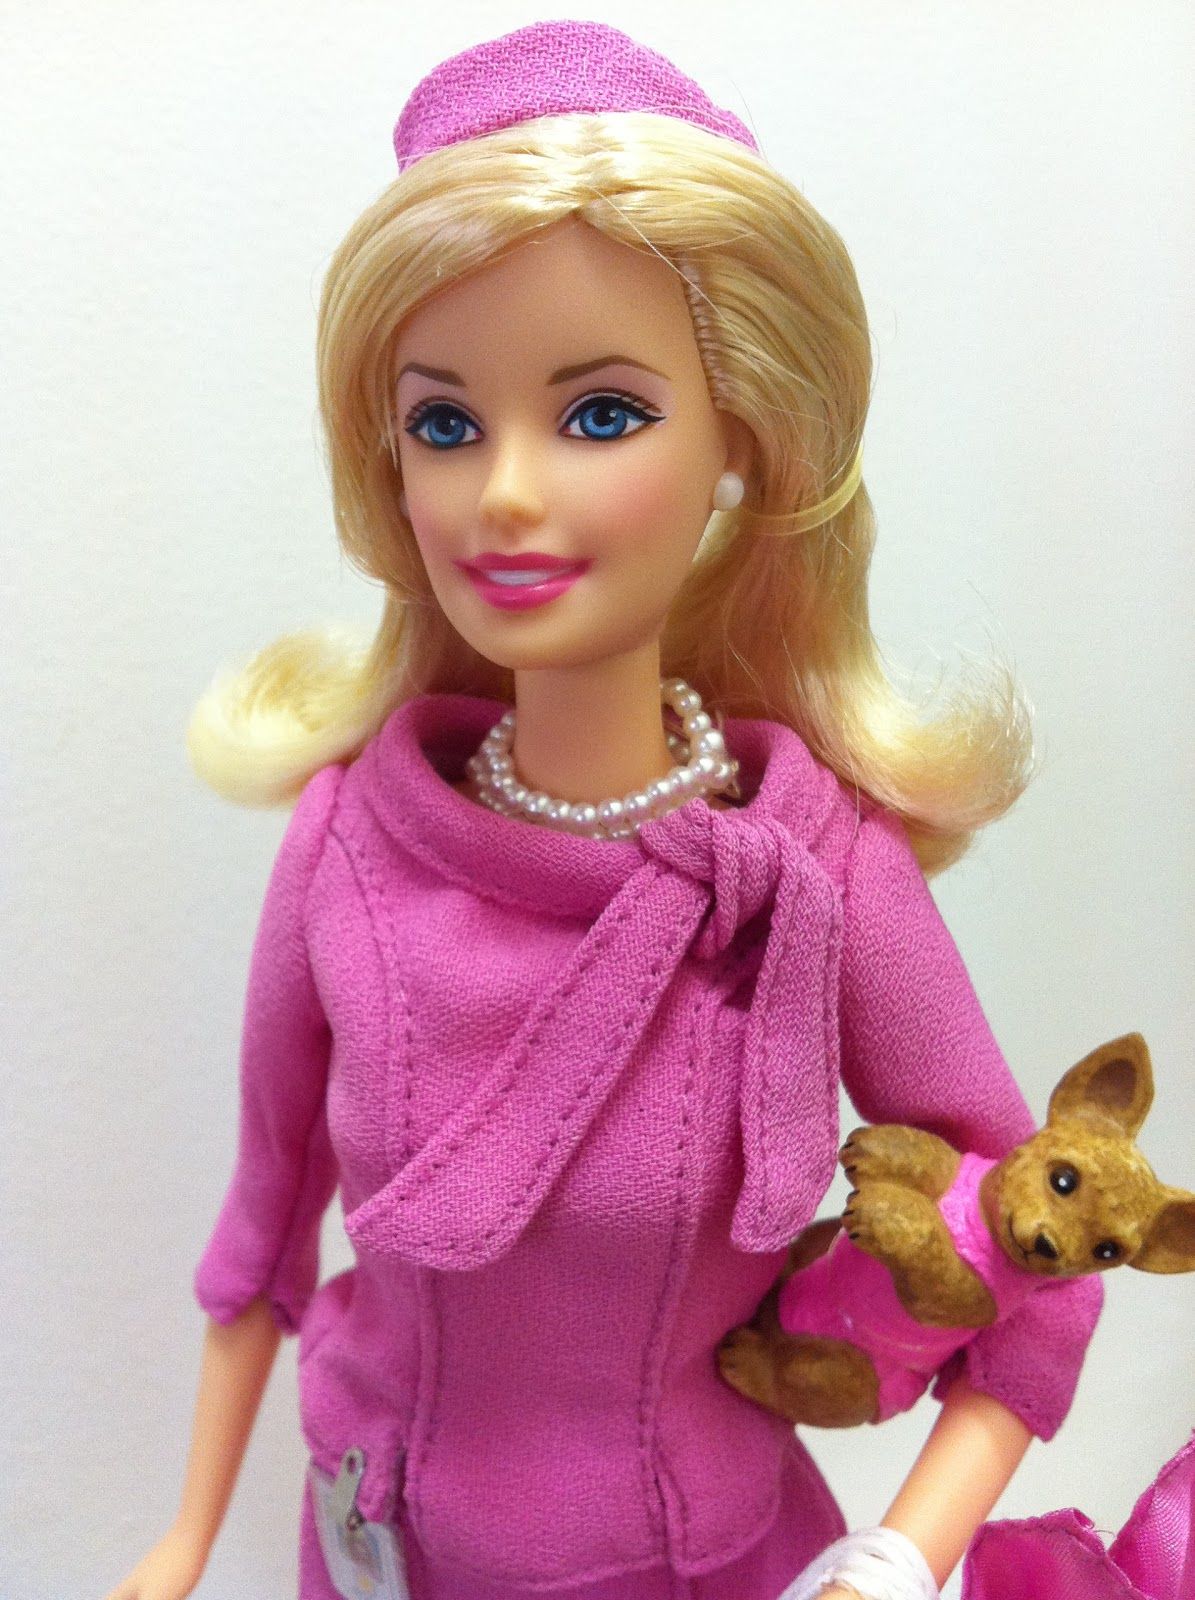 25 Licensed Barbie Dolls That Look Nothing Like The Characters ...